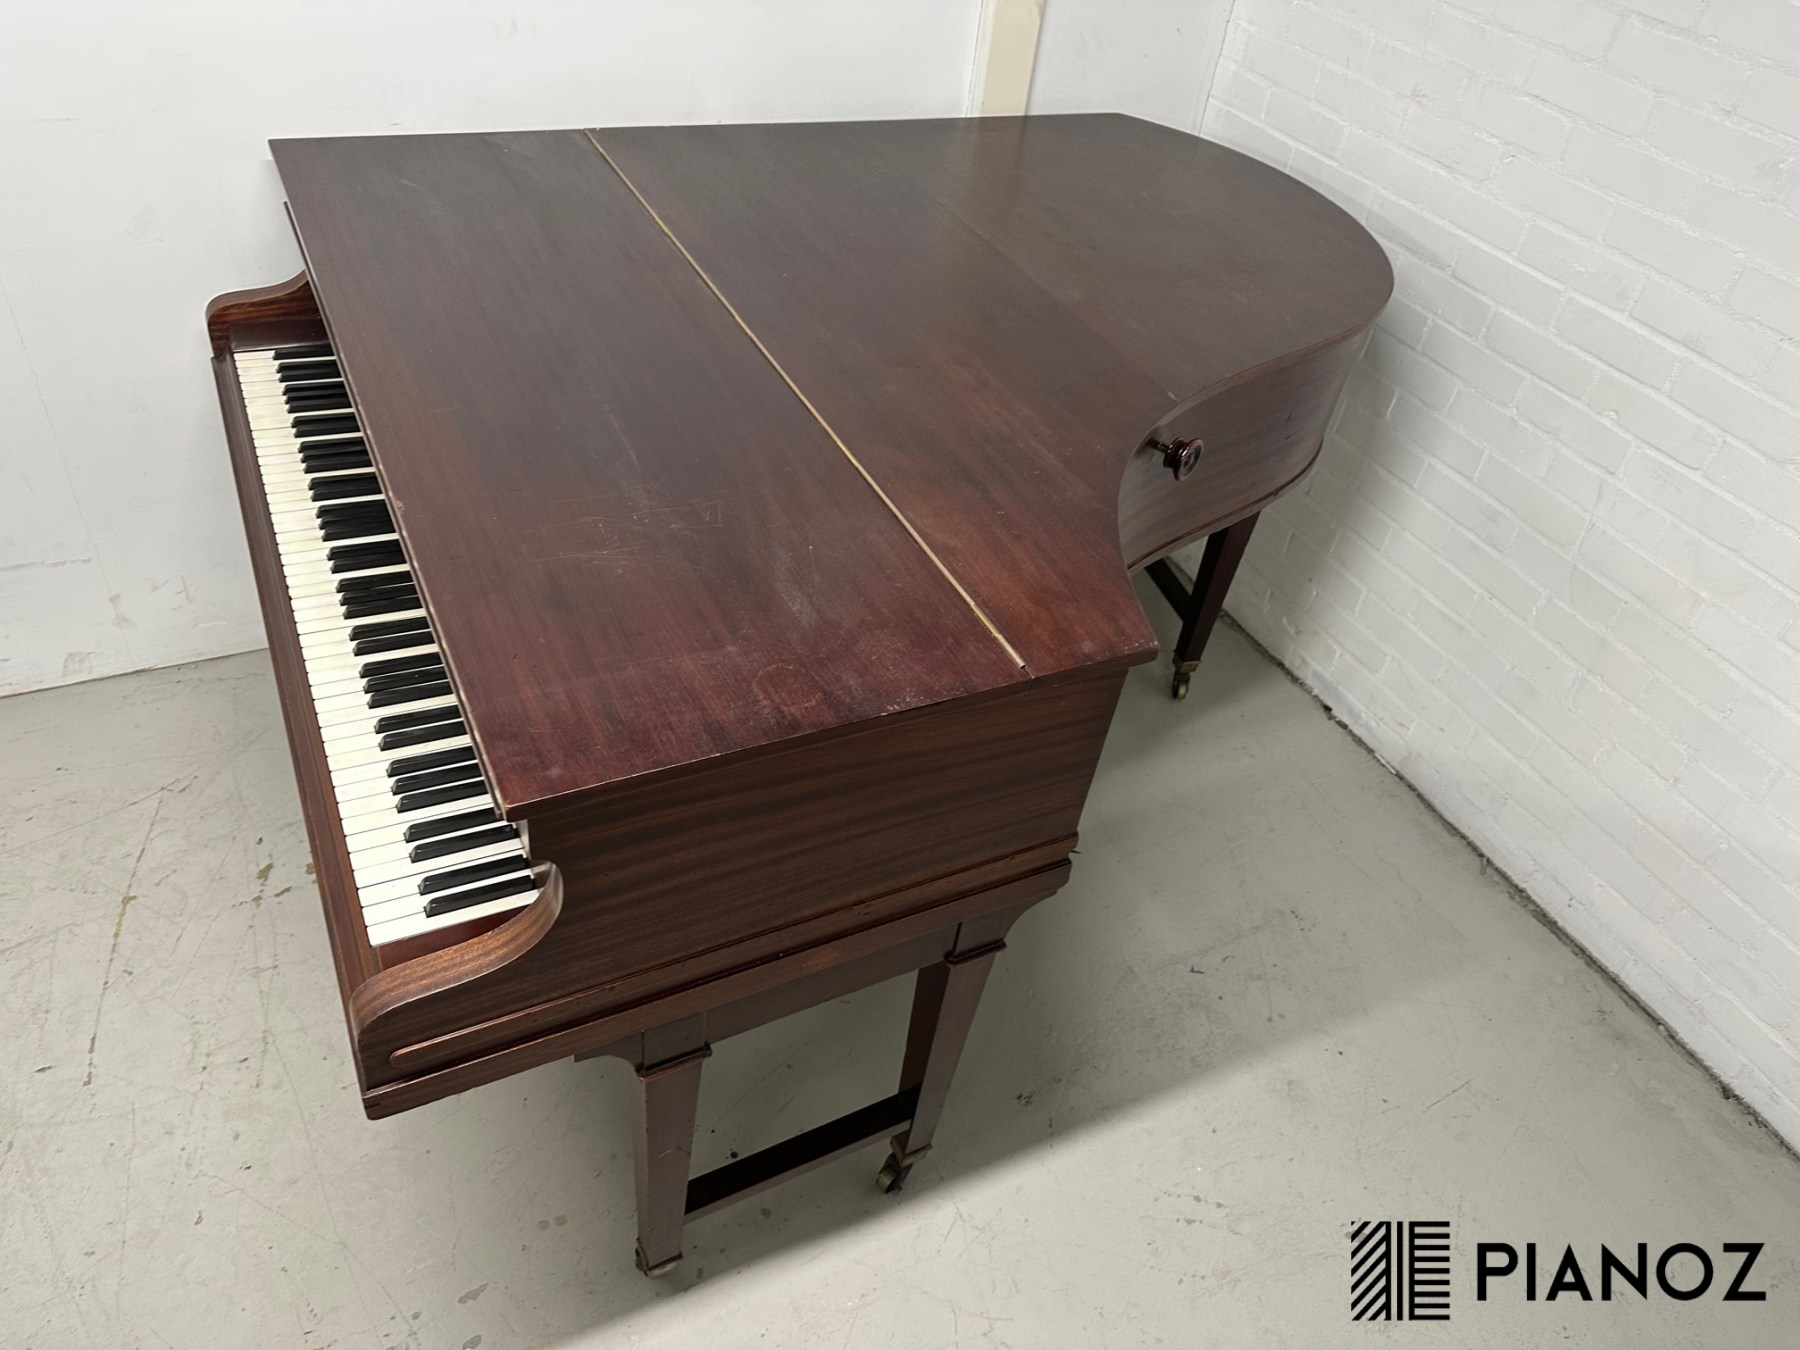 Bechstein Model A Baby Grand Piano piano for sale in UK